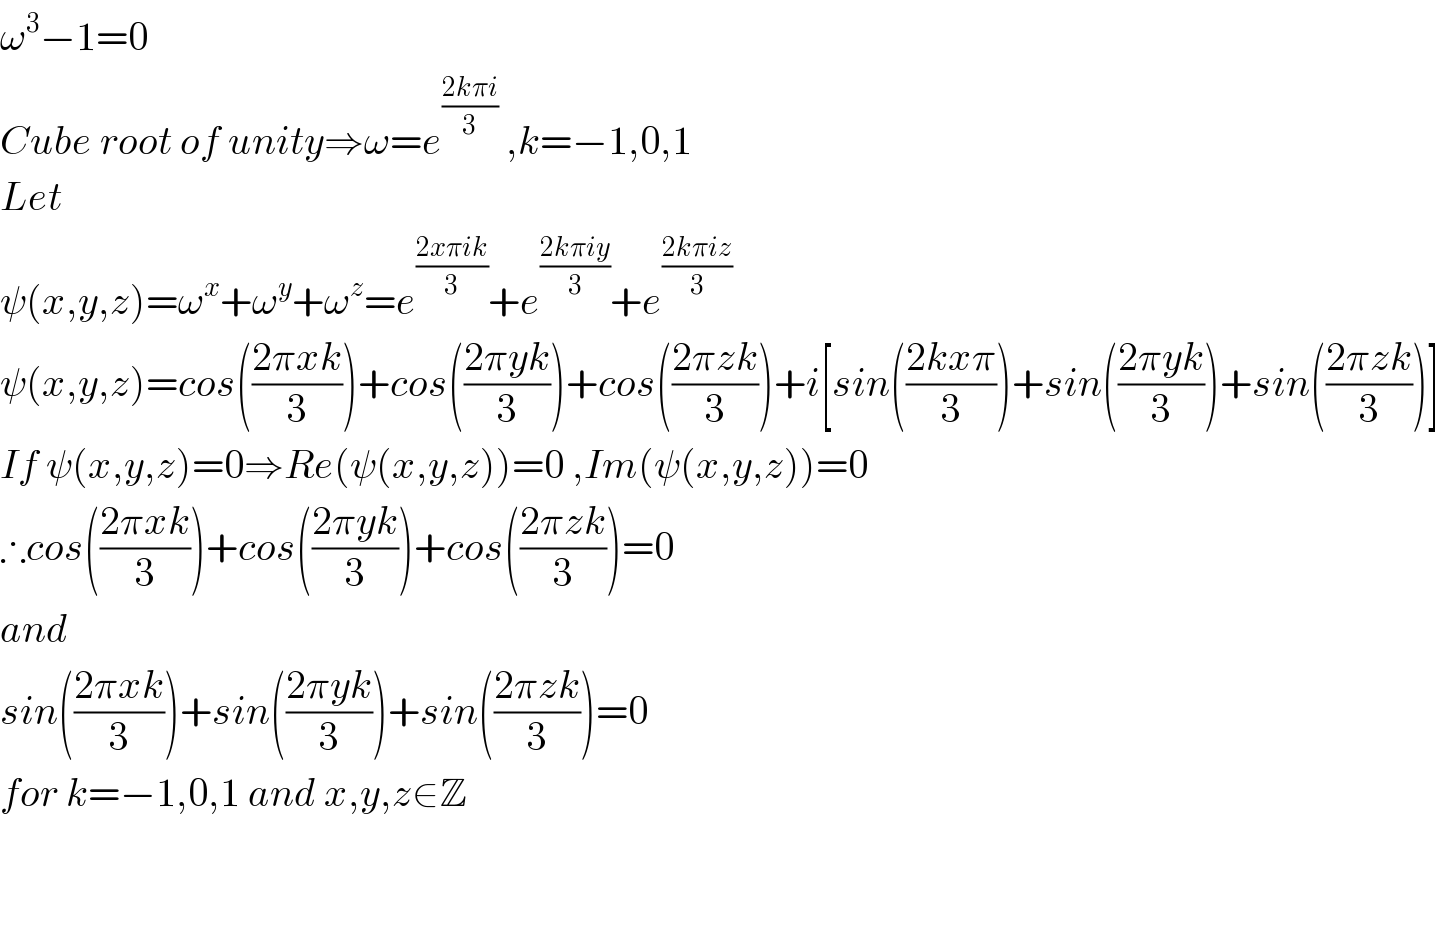 ω^3 −1=0  Cube root of unity⇒ω=e^((2kπi)/3)  ,k=−1,0,1  Let  ψ(x,y,z)=ω^x +ω^y +ω^z =e^((2xπik)/3) +e^((2kπiy)/3) +e^((2kπiz)/3)   ψ(x,y,z)=cos(((2πxk)/3))+cos(((2πyk)/3))+cos(((2πzk)/3))+i[sin(((2kxπ)/3))+sin(((2πyk)/3))+sin(((2πzk)/3))]  If ψ(x,y,z)=0⇒Re(ψ(x,y,z))=0 ,Im(ψ(x,y,z))=0  ∴cos(((2πxk)/3))+cos(((2πyk)/3))+cos(((2πzk)/3))=0  and   sin(((2πxk)/3))+sin(((2πyk)/3))+sin(((2πzk)/3))=0  for k=−1,0,1 and x,y,z∈Z      